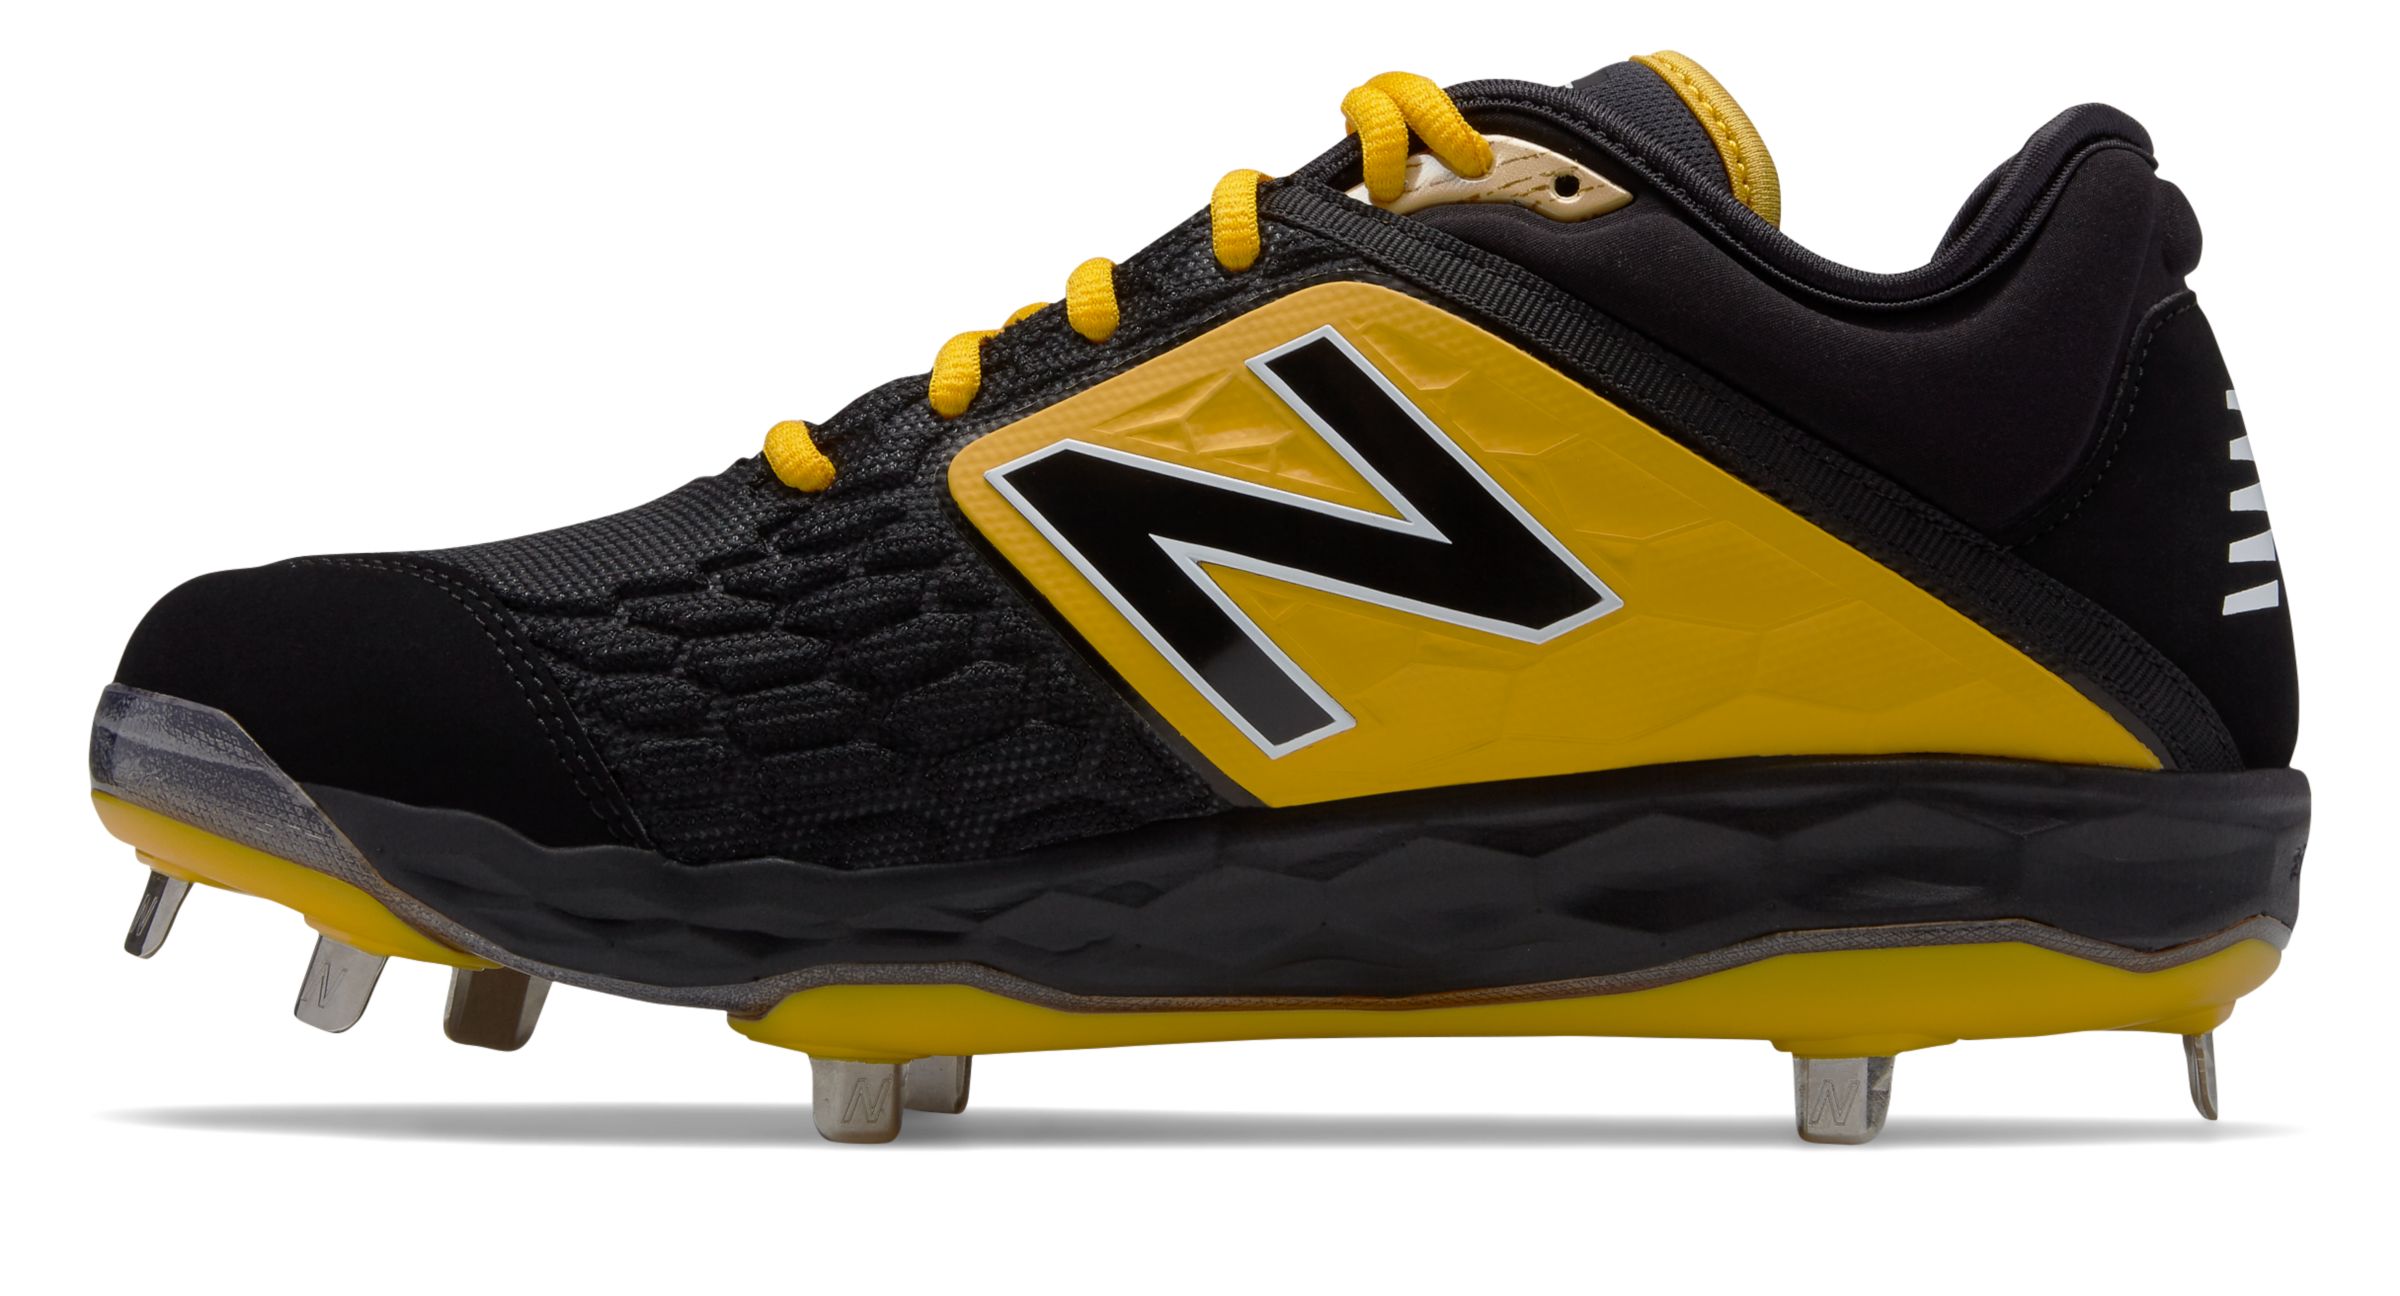 New Balance Low-Cut 3000v4 Metal Baseball Cleat Mens Shoes Black with Yellow - image 2 of 4